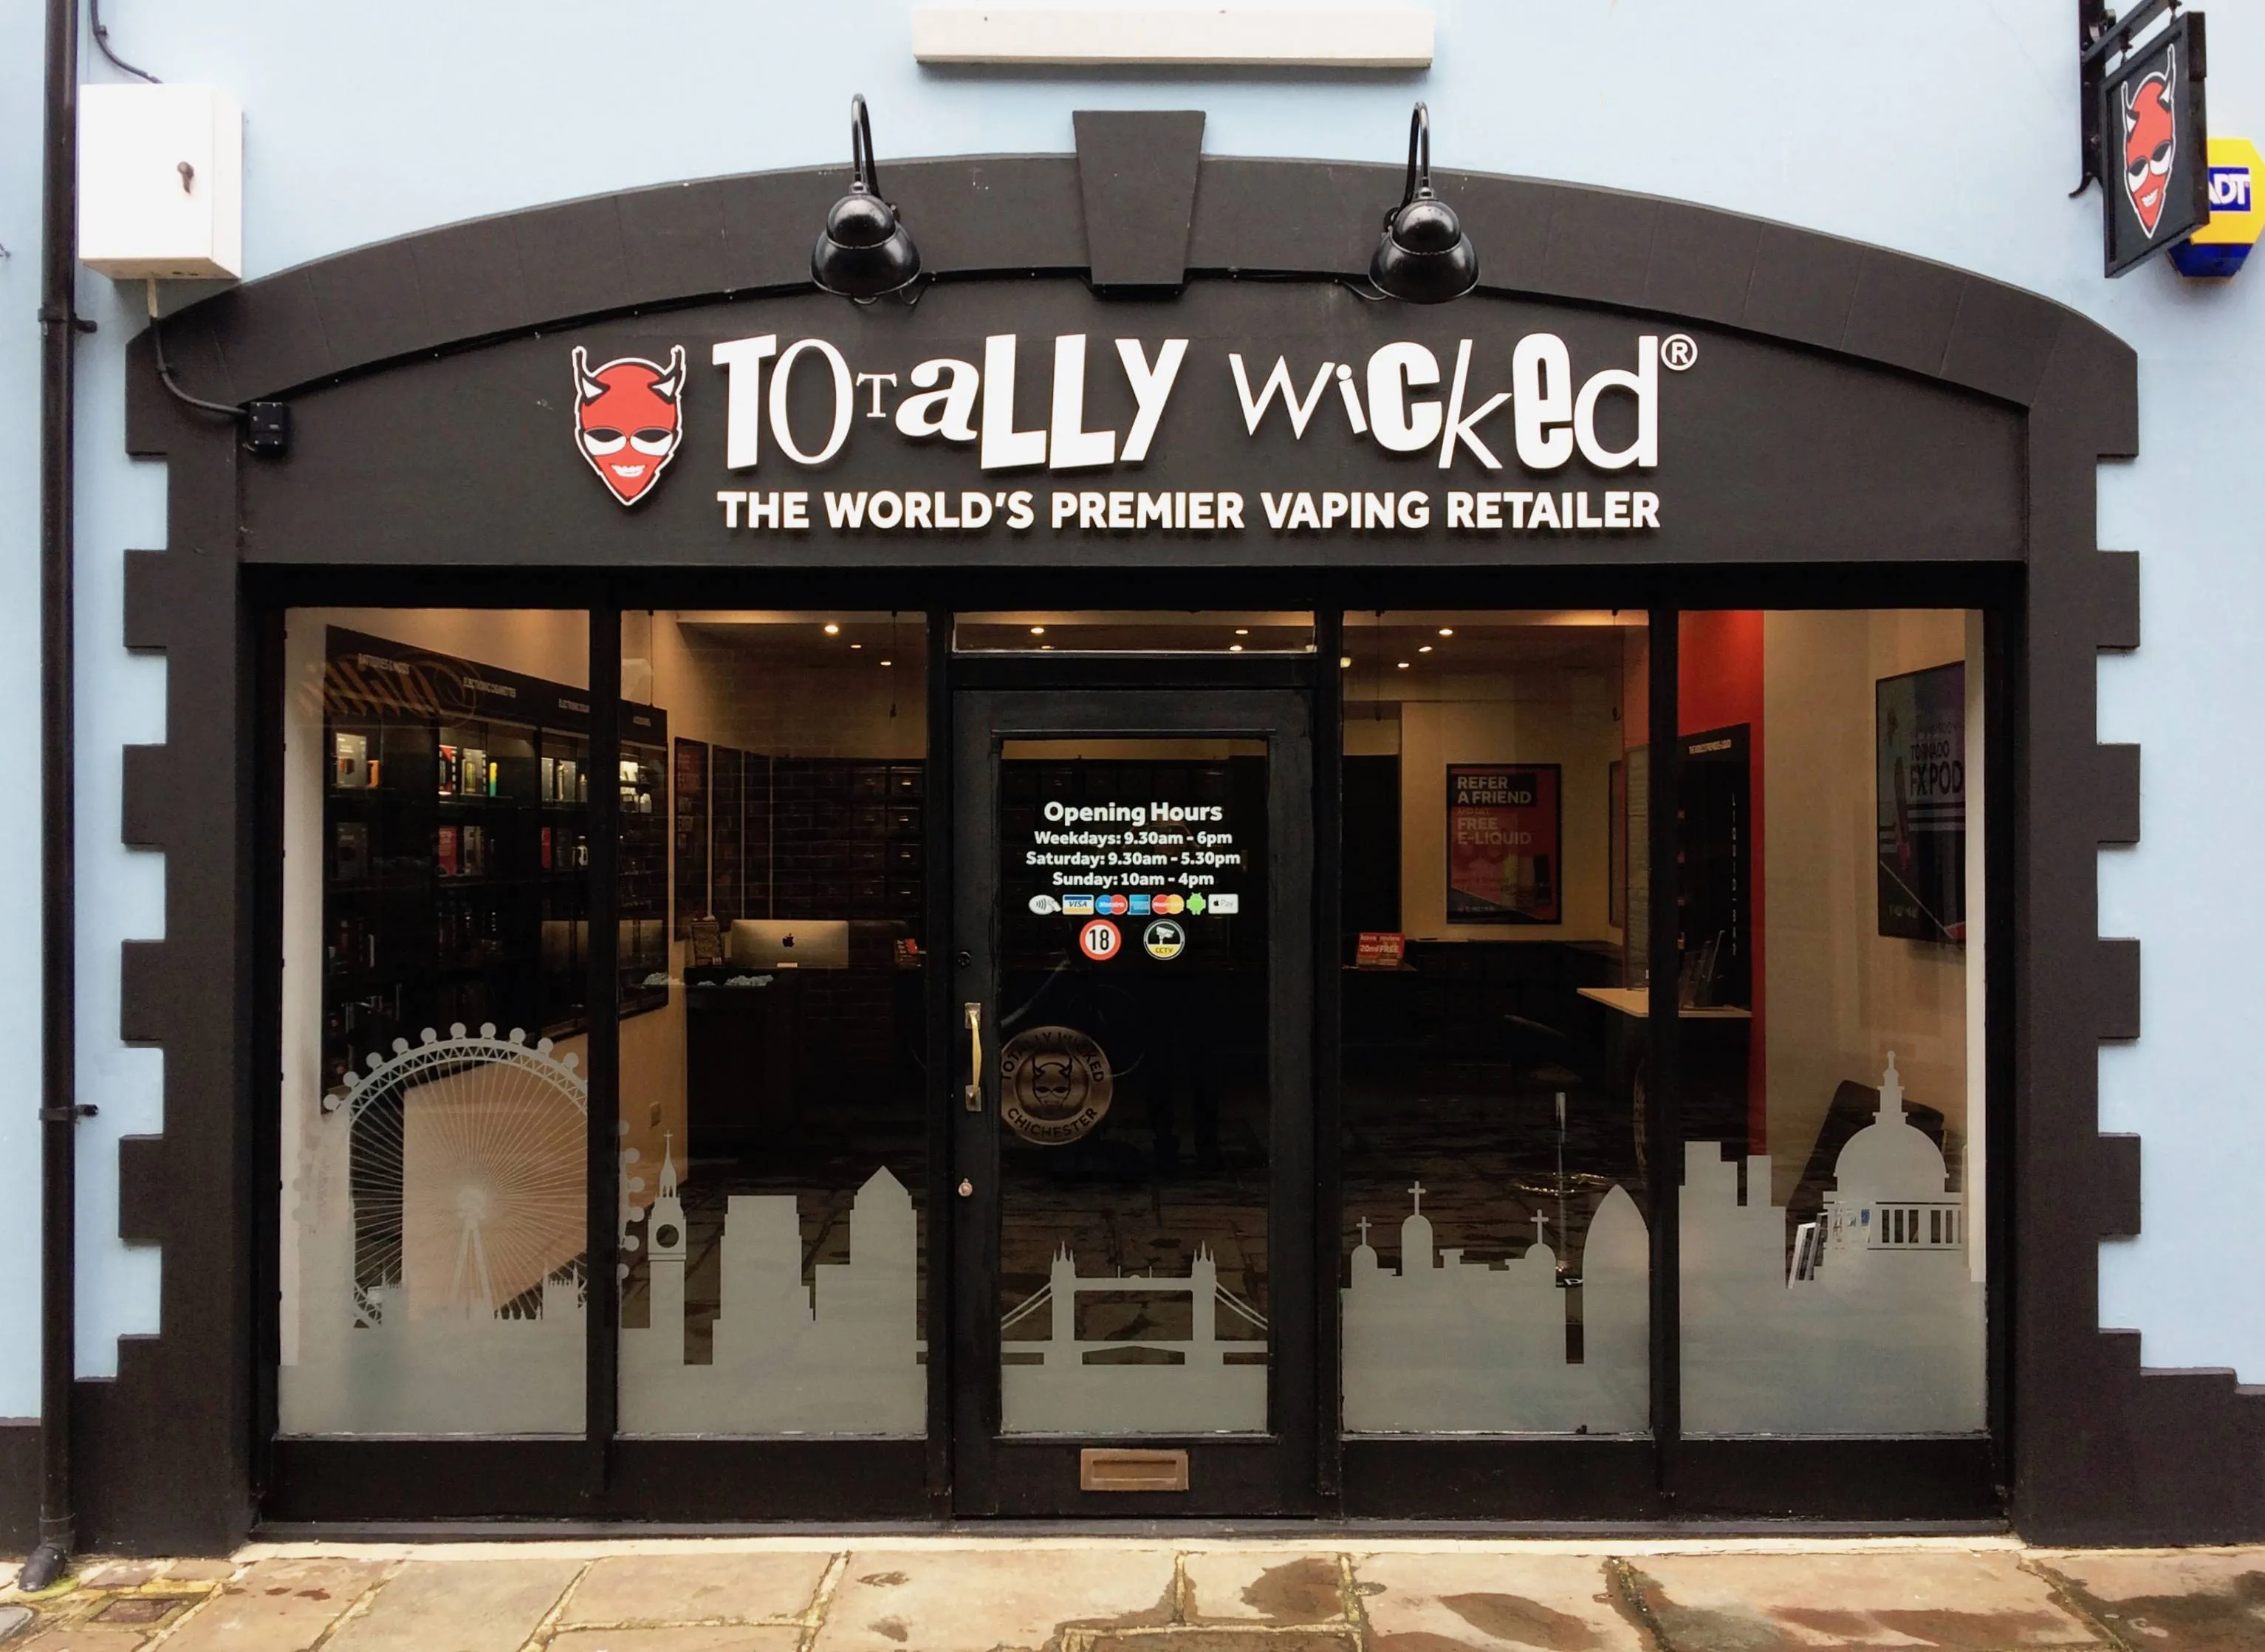 Totally Wicked in United Kingdom, europe | e-Cigarettes - Country Helper